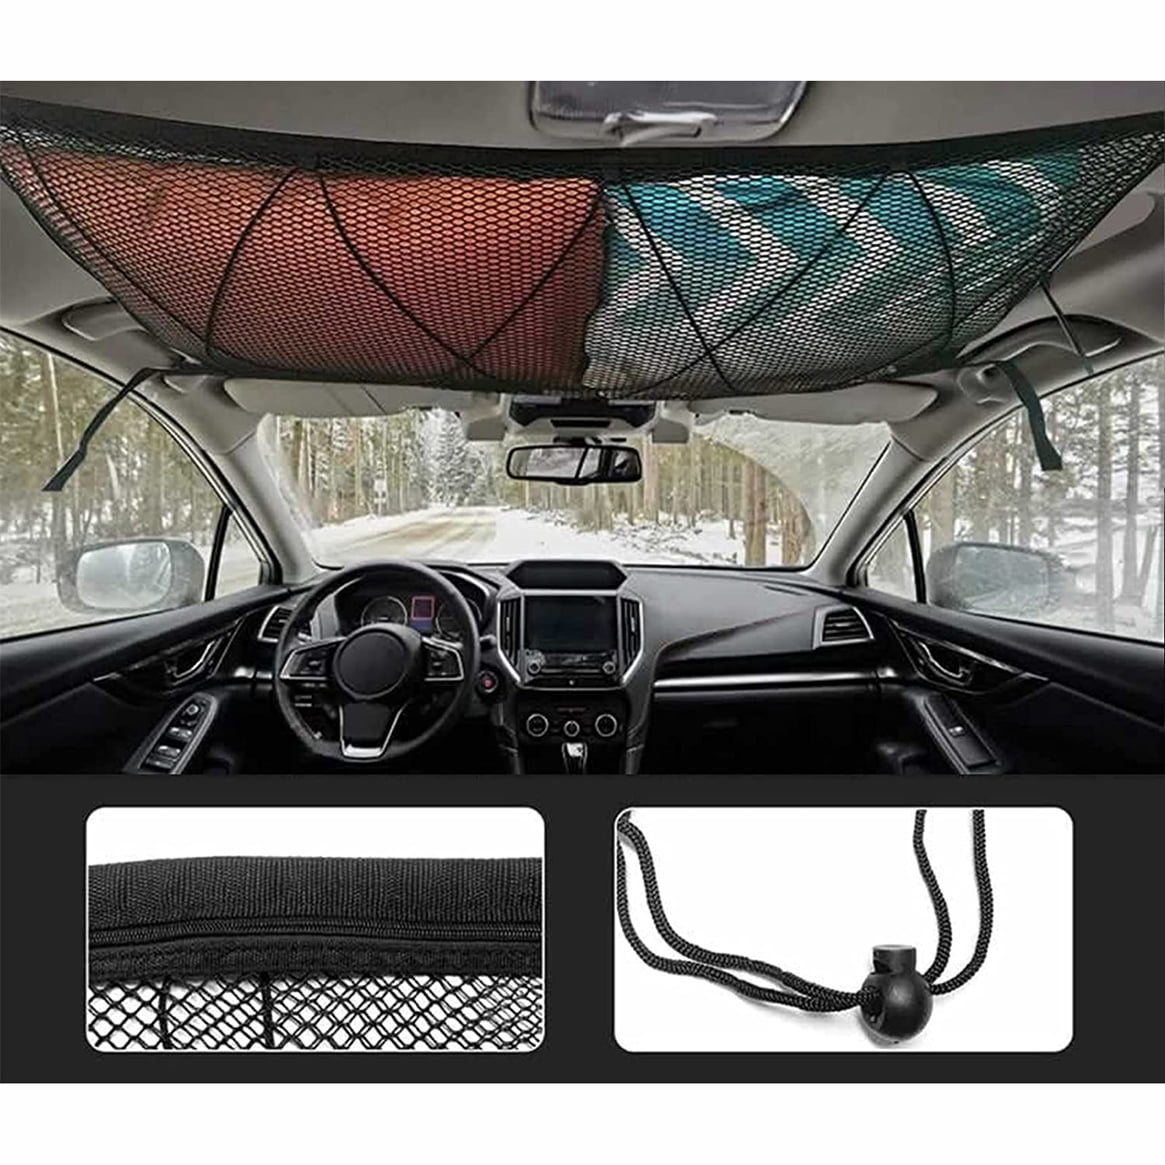 35.4x25.5 Car Roof Storage Organizer with Zipper Buckle Long Trip Camping SUV Storage Bag Tent Putting Quilt Children's Toy Towel Sundries Interior Accessories Car Ceiling Cargo Net Pocket